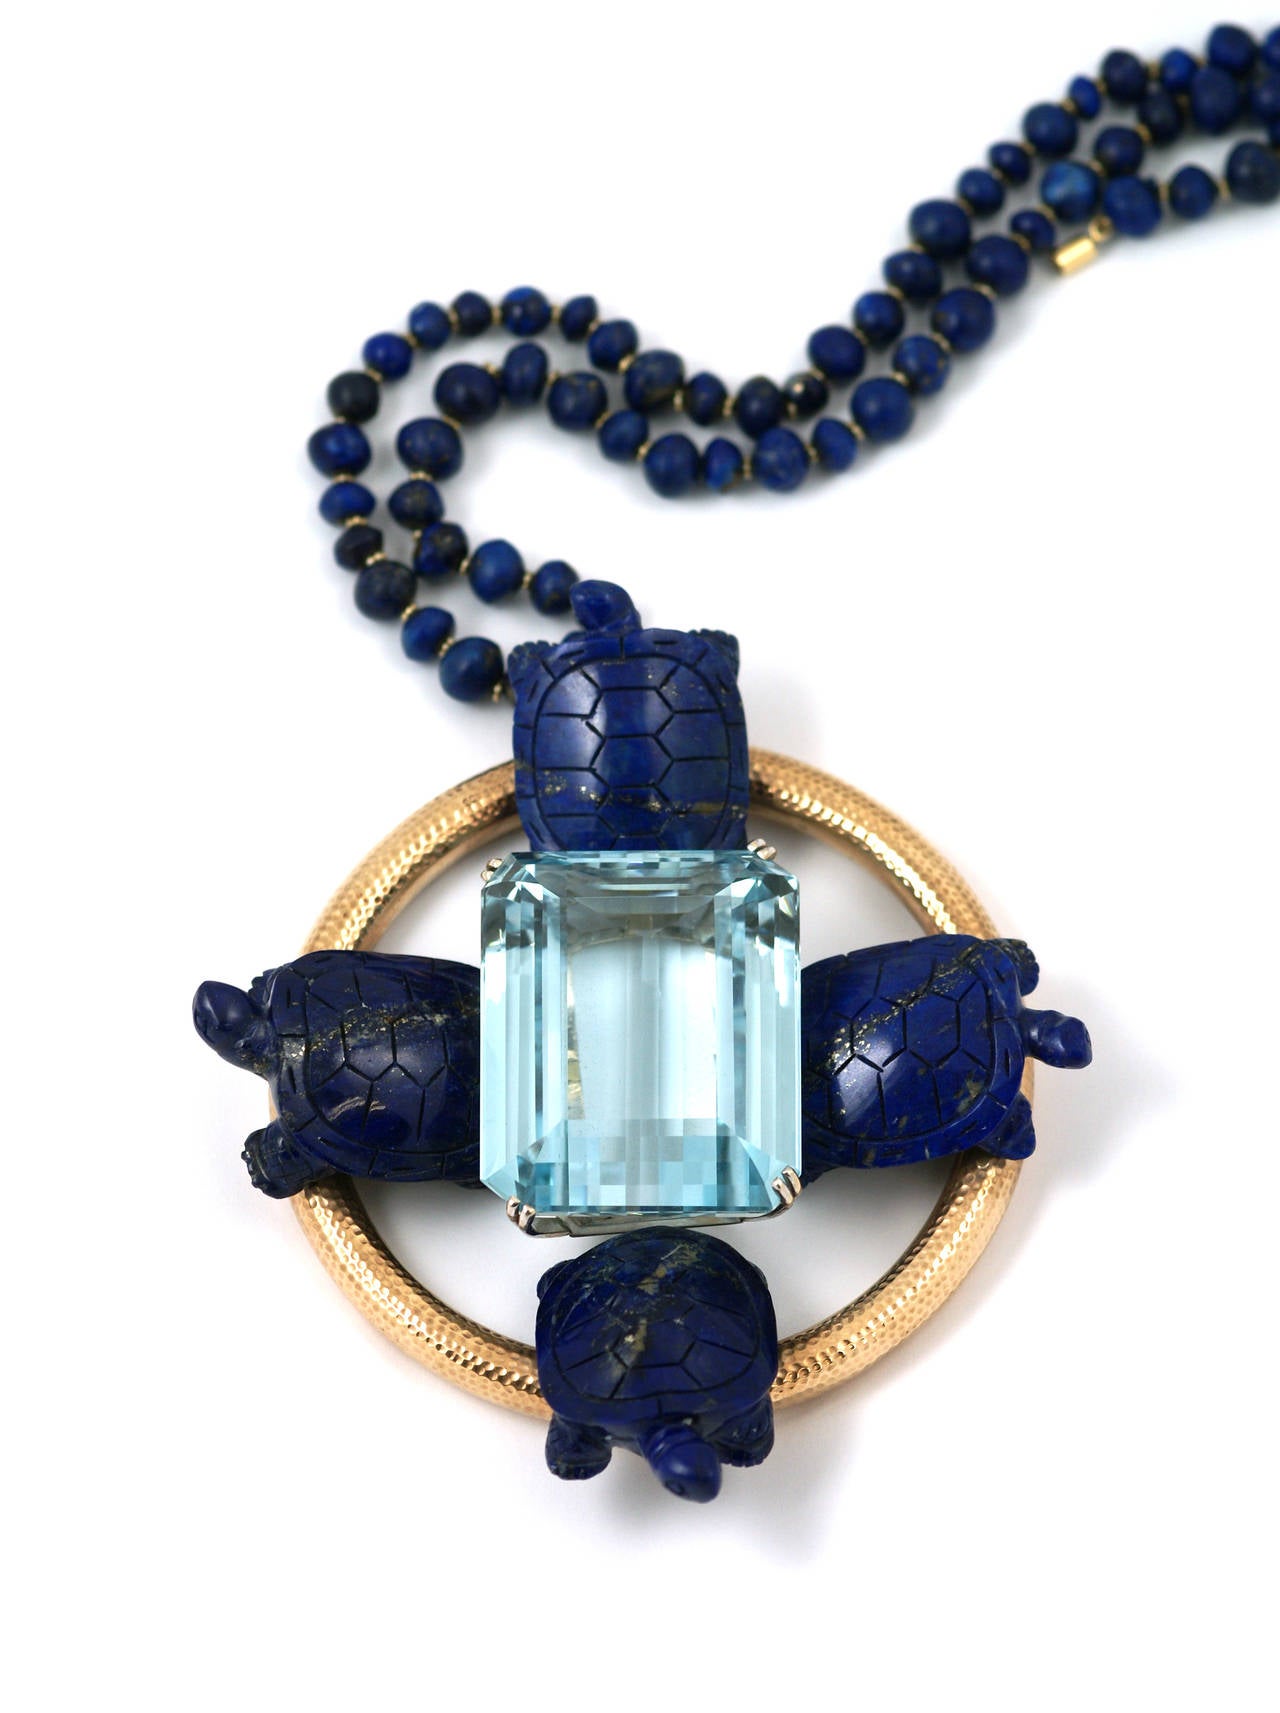 An extravagant and impressive necklace composed of four lapis lazuli turtles 